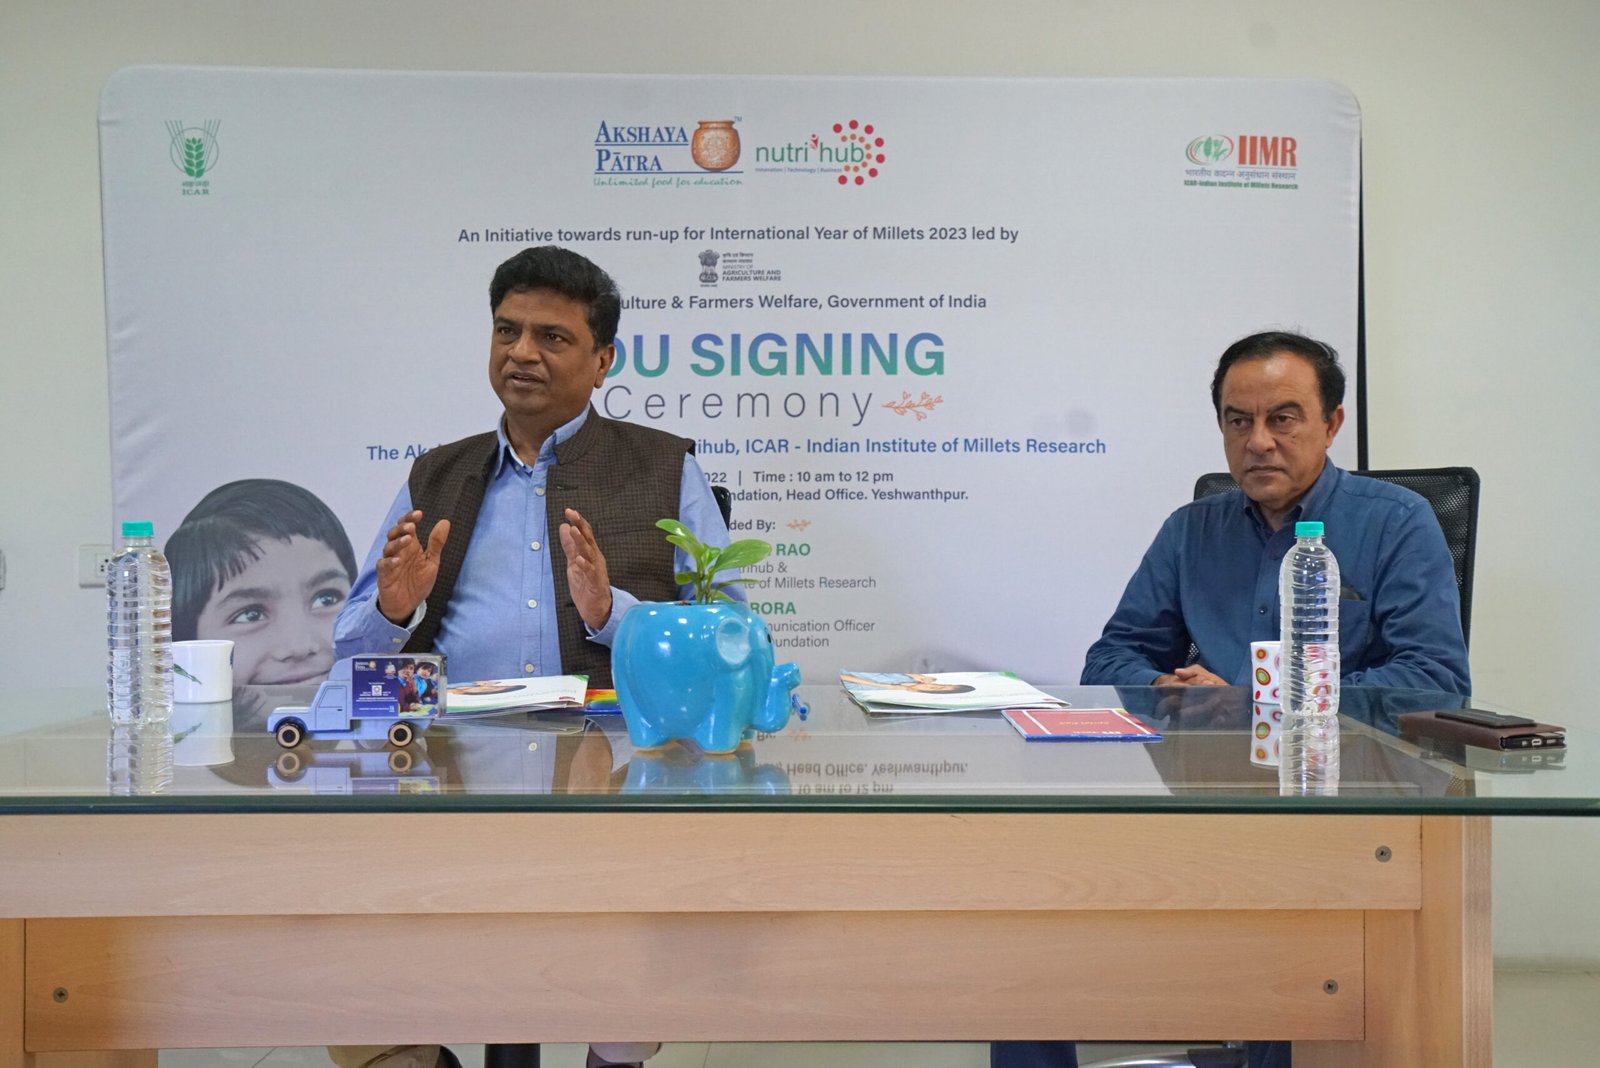 The Akshaya Patra Foundation inks an MOU with the Nutrihub, Indian Institute of Millets Research